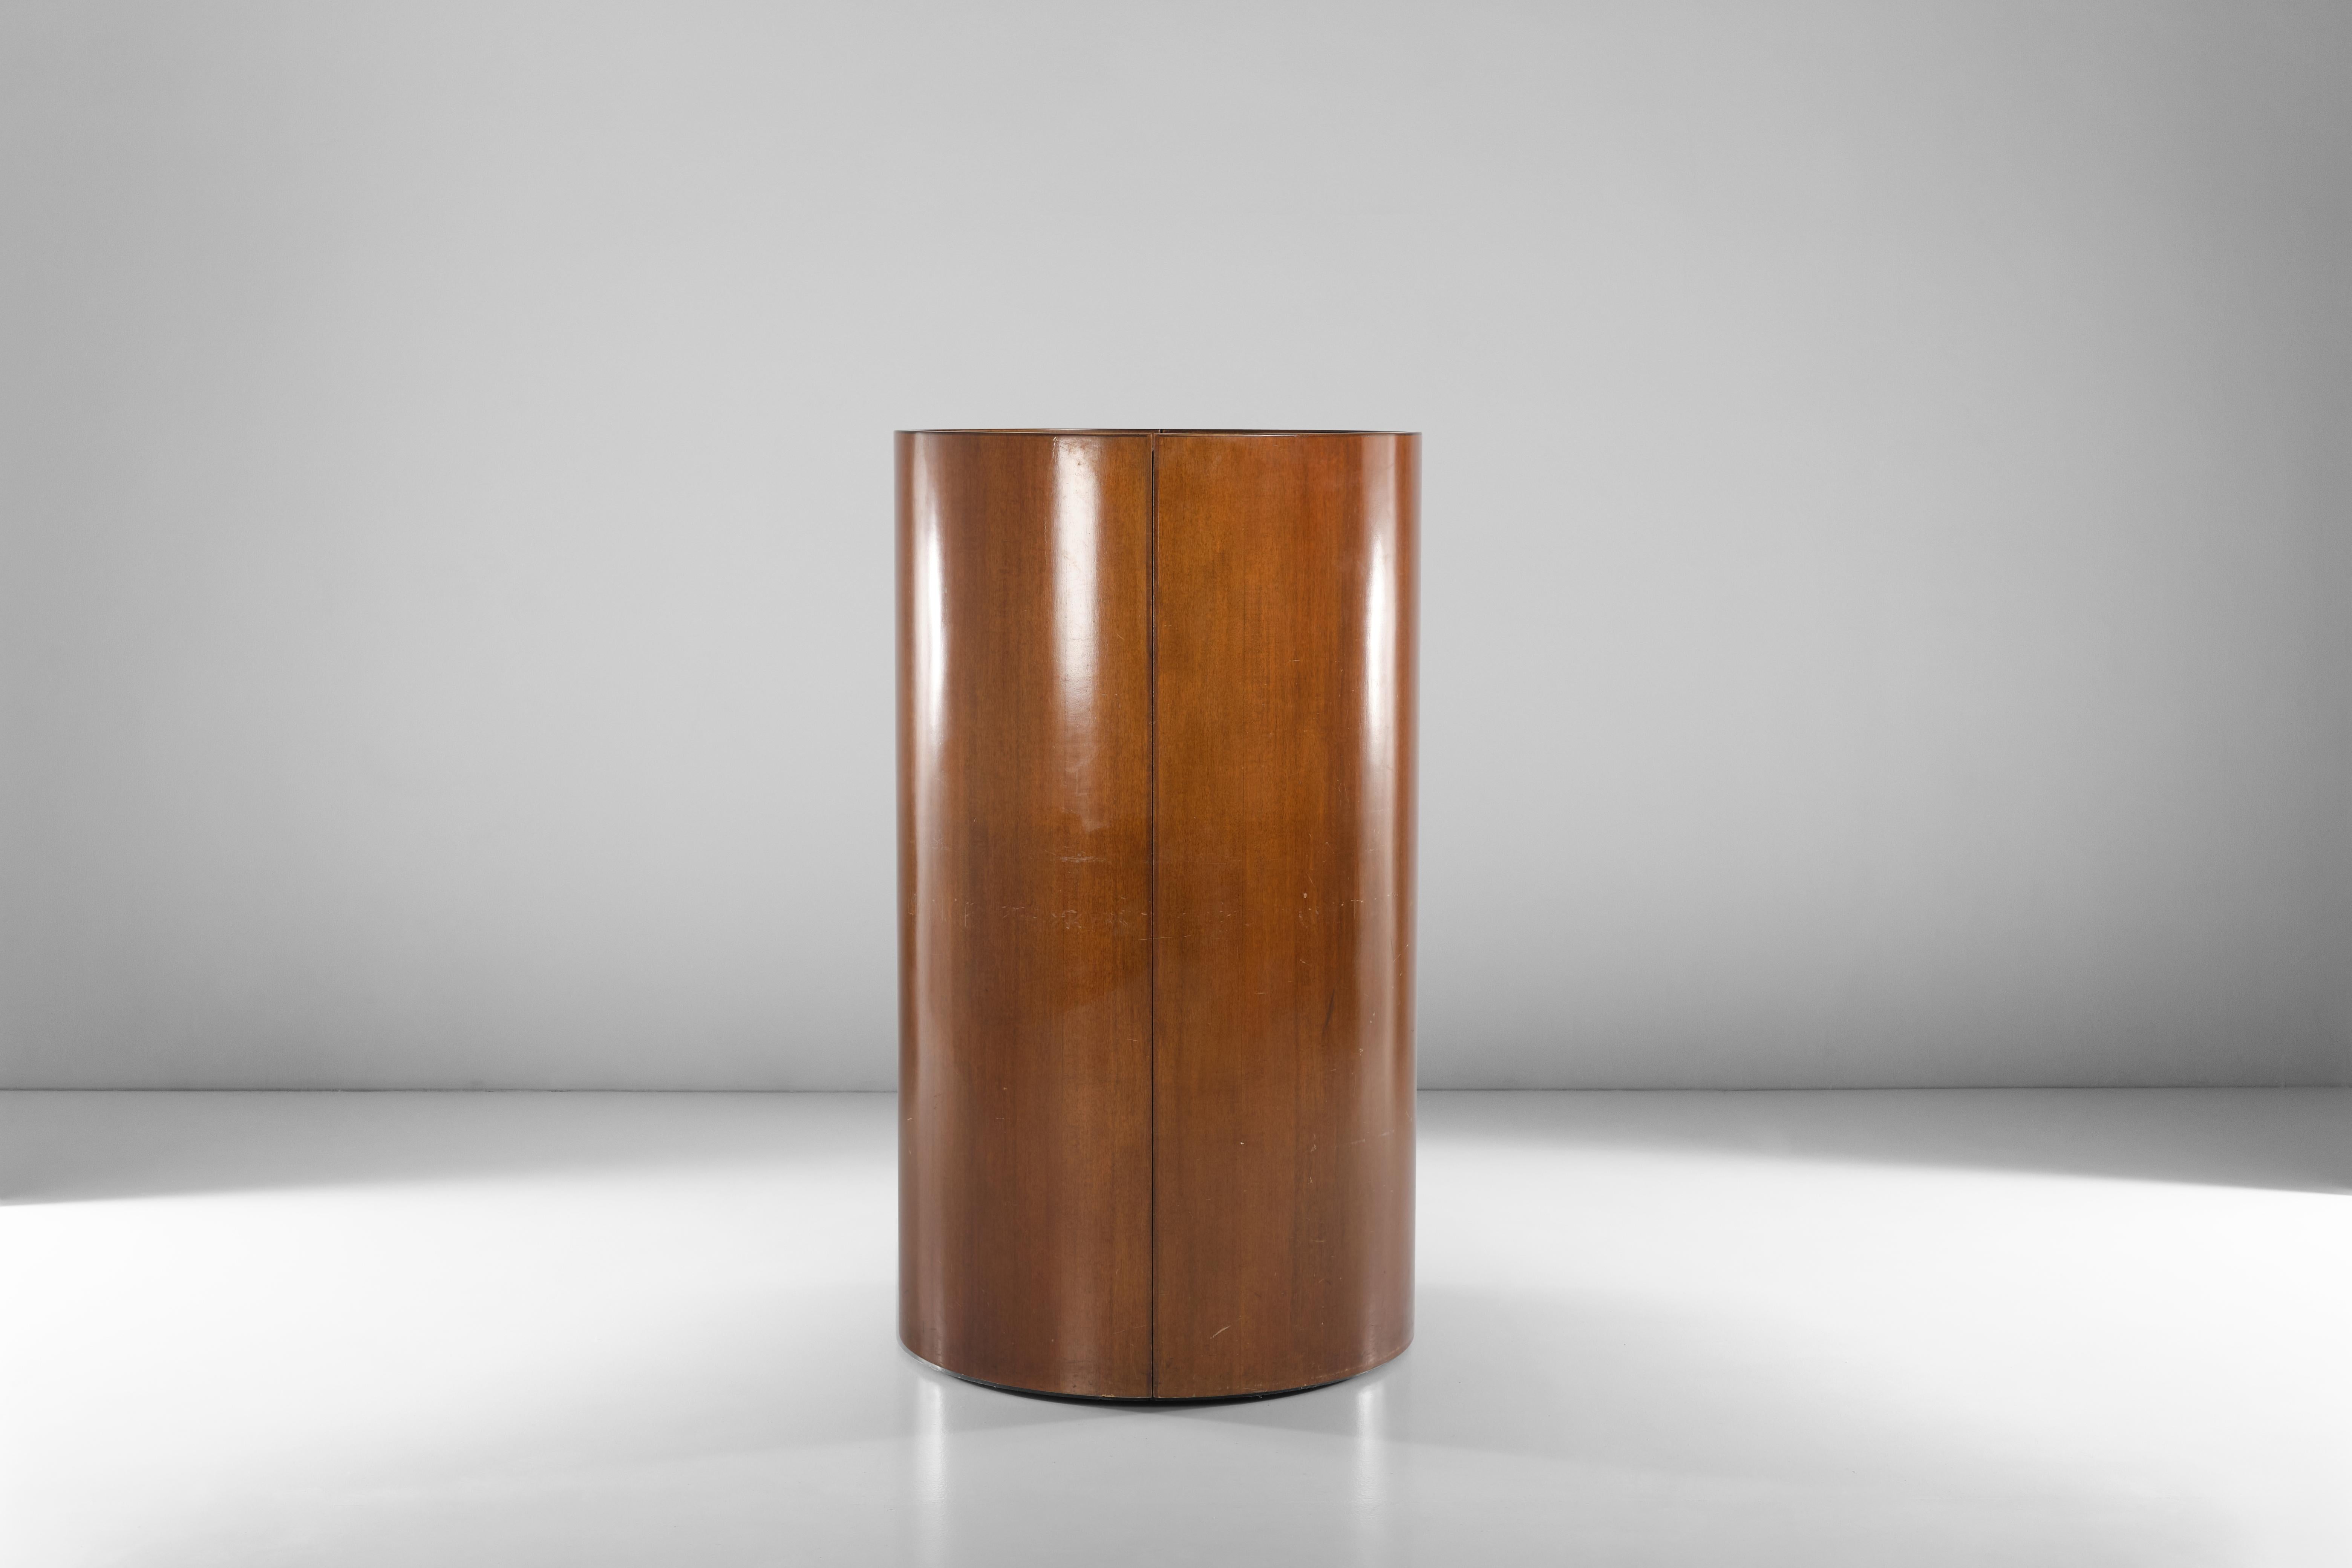 This amazing bar cabinet - attributed to Nani Prina - is made out of a wooden body and concived to be functional and perfect for everyday use: the closing mechanism allow to hide easily all the items stored maintaining its decorative side.
Perfect